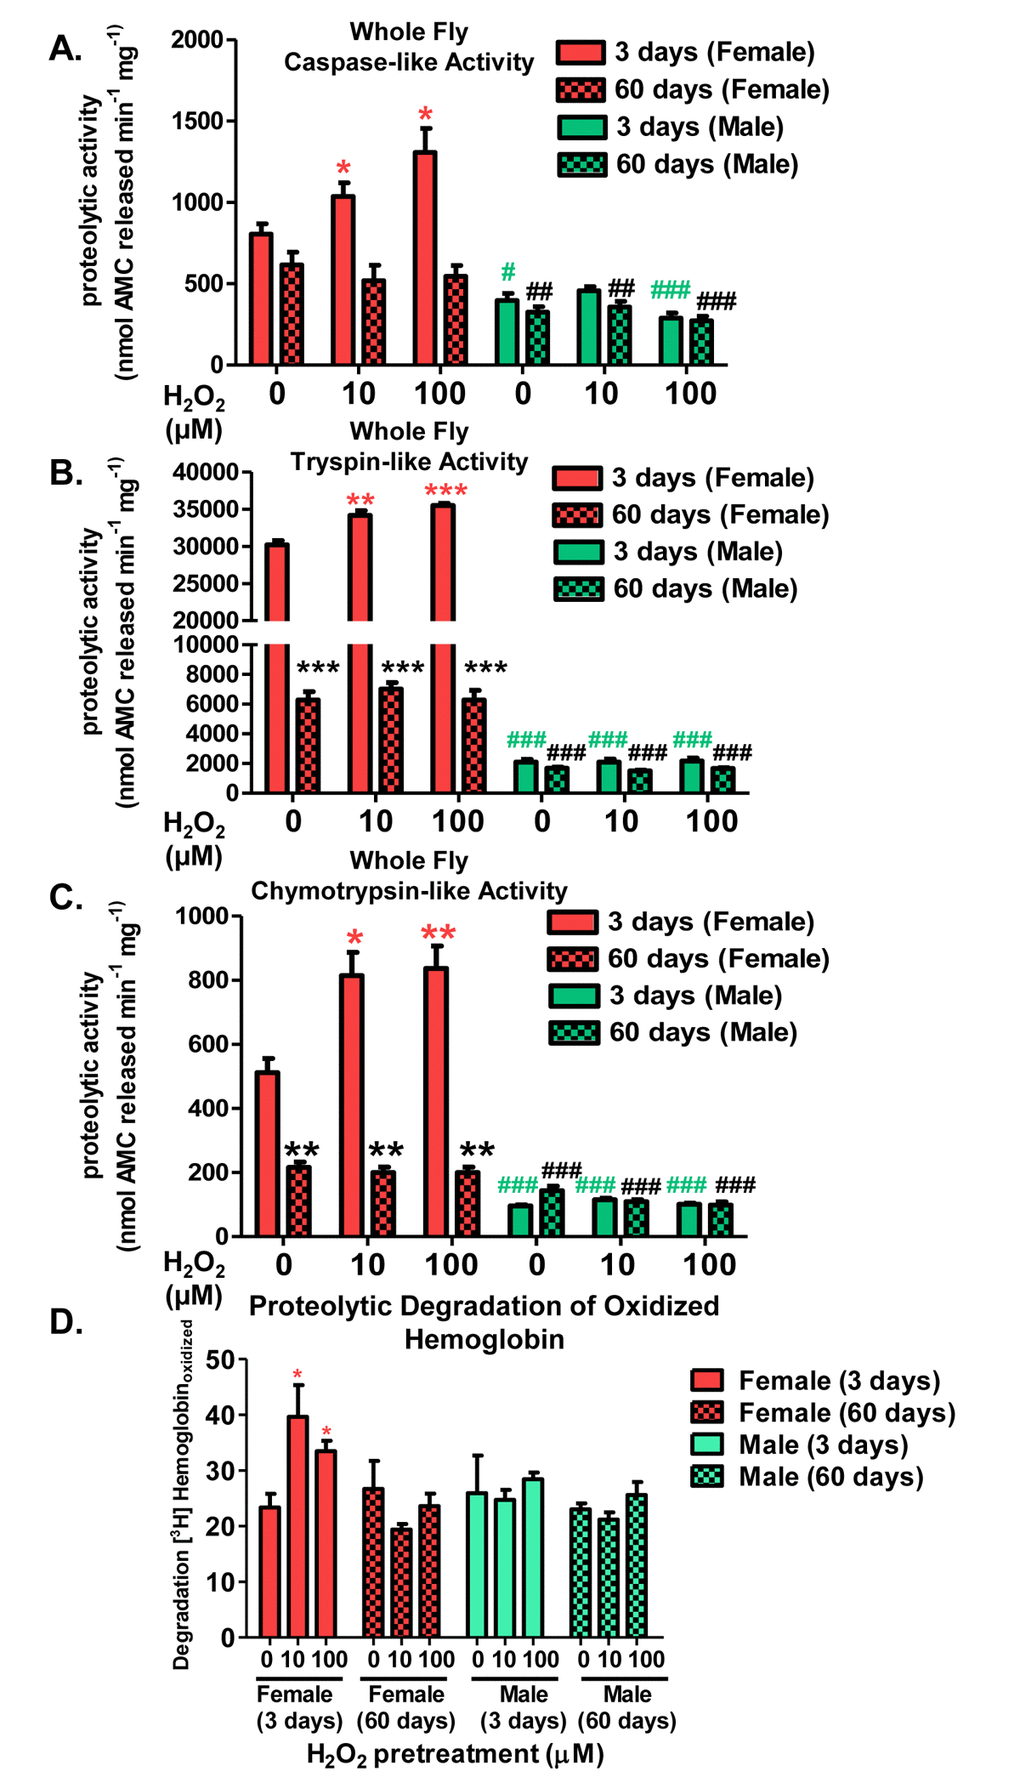 Adaptive proteolytic capacity of the 20S proteasome diminishes with age in a sex-dependent manner. Virgin females of the Actin-GS-255B strain were crossed to males of the w[1118] strain and progeny were assayed for the proteolytic activity of the three catalytic subunits of the 20S proteasome in 3 day-old (red or blue) and 60 day-old flies (checked pattern). Caspase-like activity in (A) Females and males. Trypsin-like activity in (B) Females and males. Chymotrypsin-like activity in (C) Females and males. (D) Proteolytic degradation of oxidized [3H] hemoglobin in flies pretreated with hydrogen peroxide at 3 days and 60 days. Statistical significance for proteolysis of oxidized substrate was compared to young control females. Error bars denote standard error of the mean (S.E.M) values. * P P P *), aged females (black *), young males (green #), and aged males (black #). Statistical significance was calculated relative to the young control females (A-D).